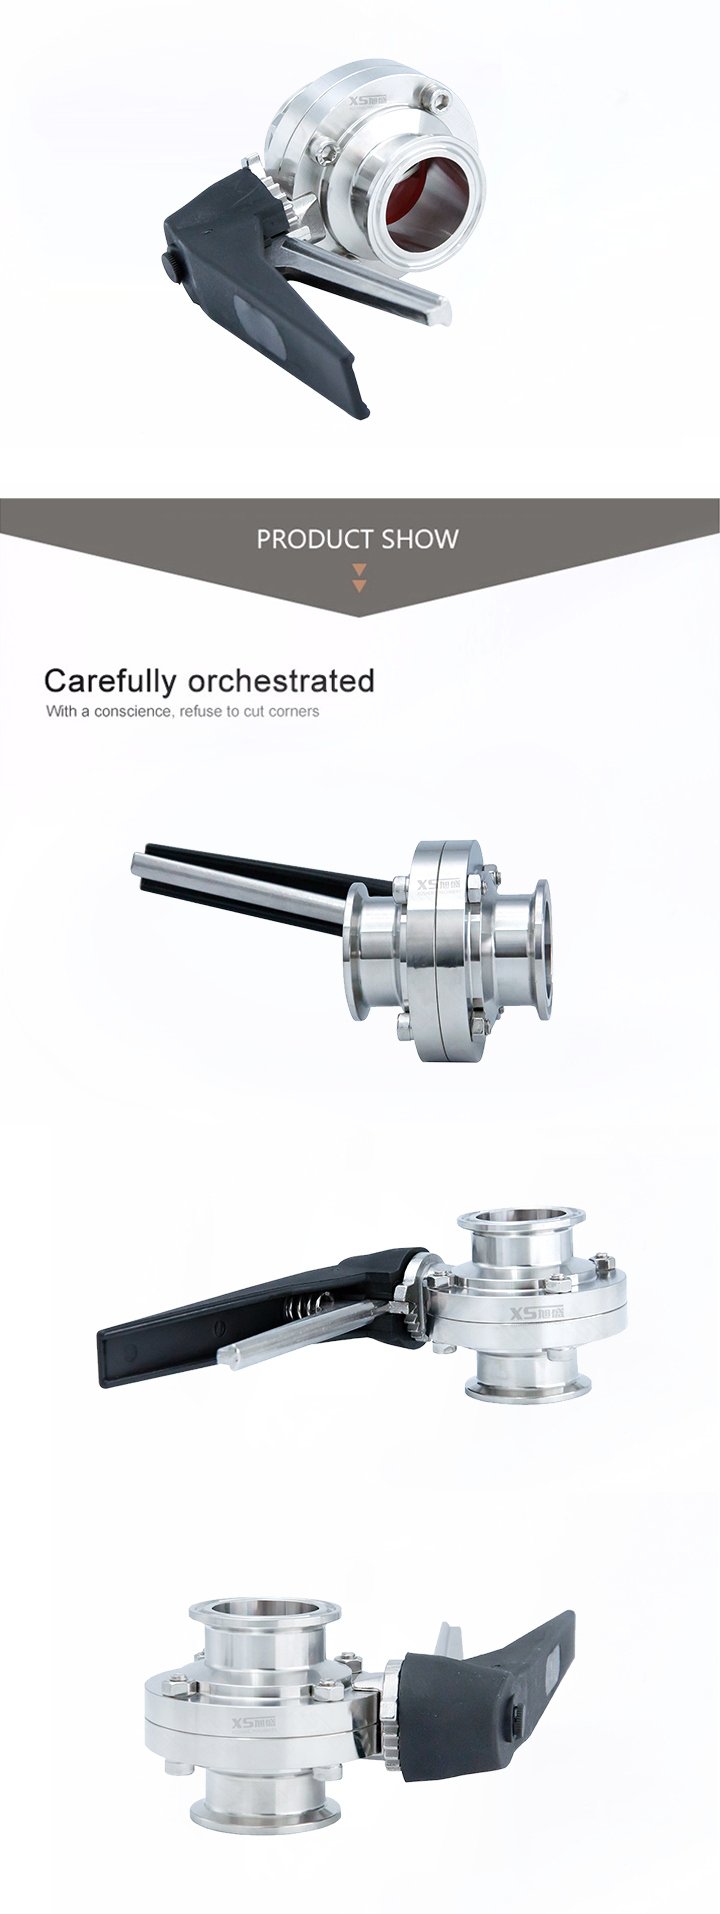 Stainless Steel Sanitary Manual Pneumatic Butterfly Valves